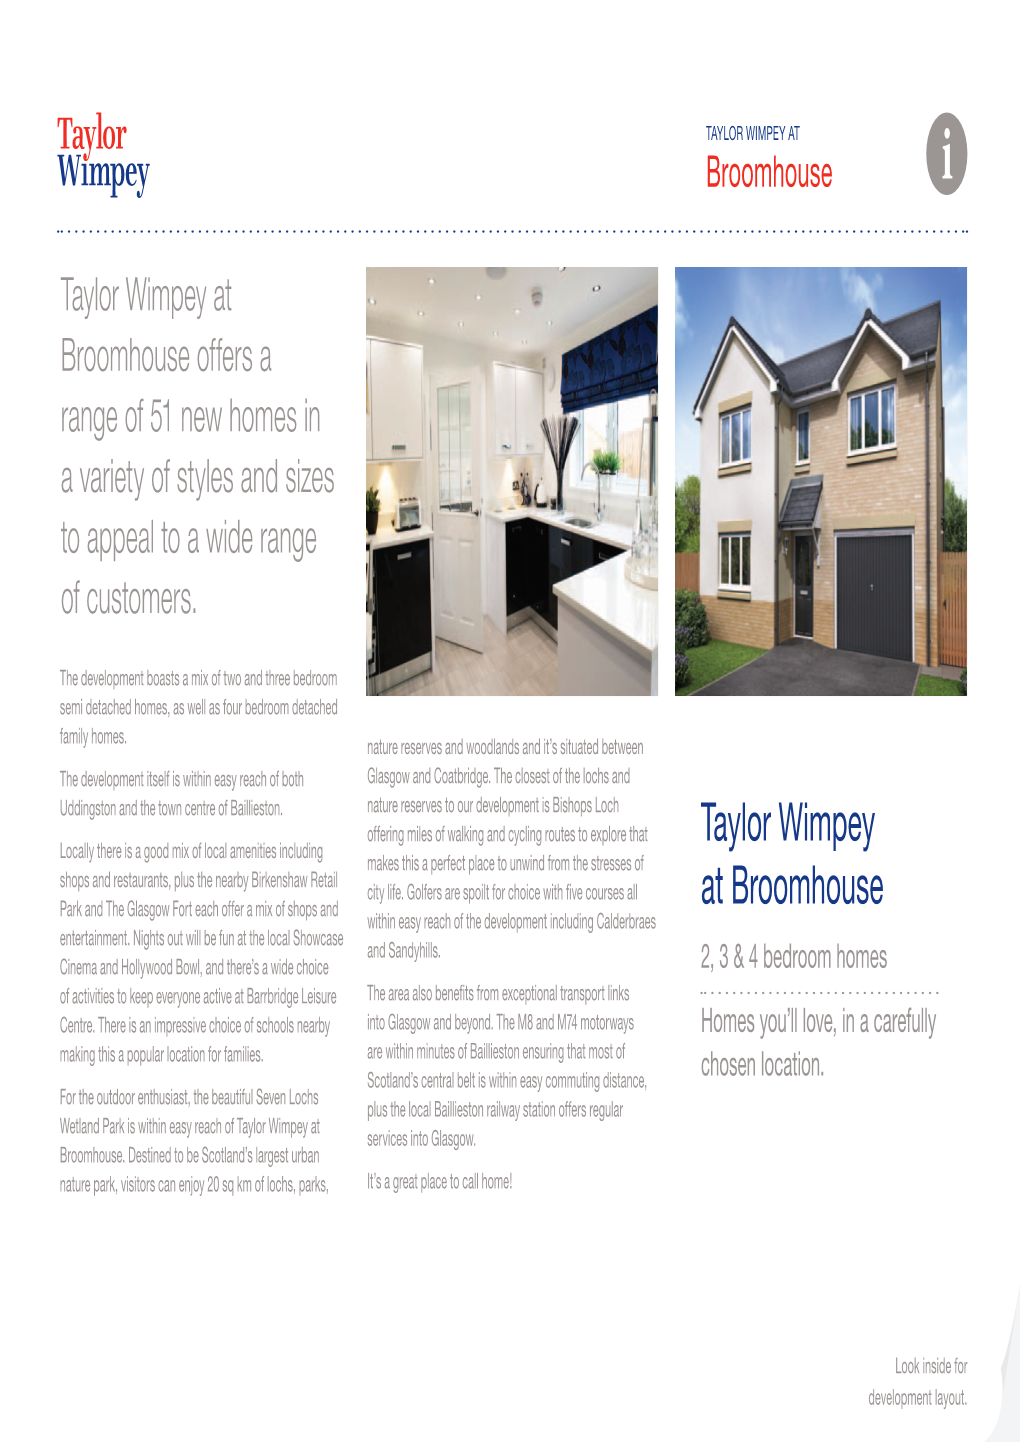 TAYLOR WIMPEY at Broomhouse